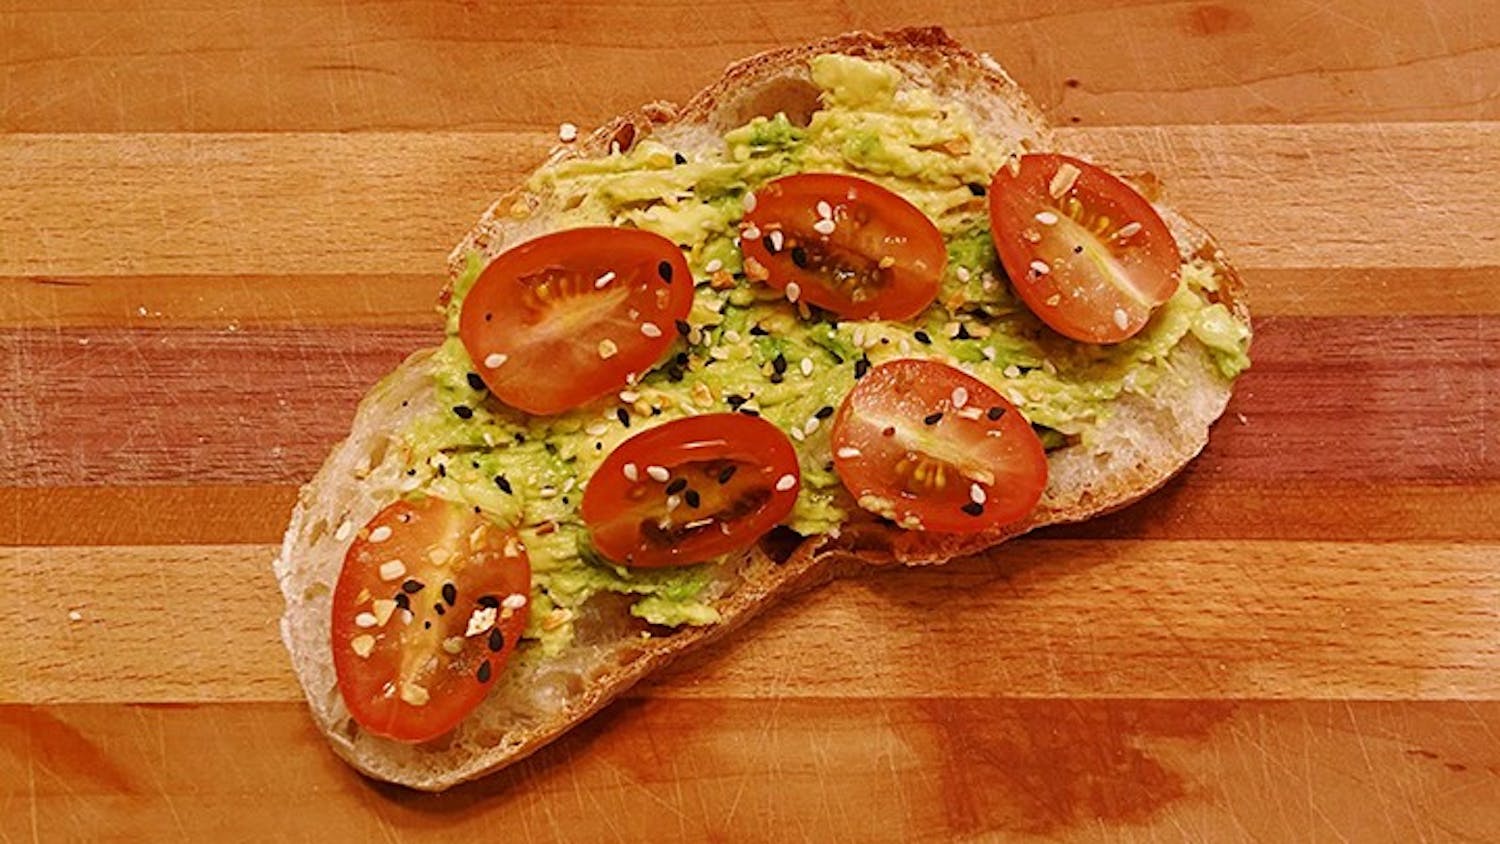 &nbsp;A piece of toast topped with avocado and tomato.&nbsp;